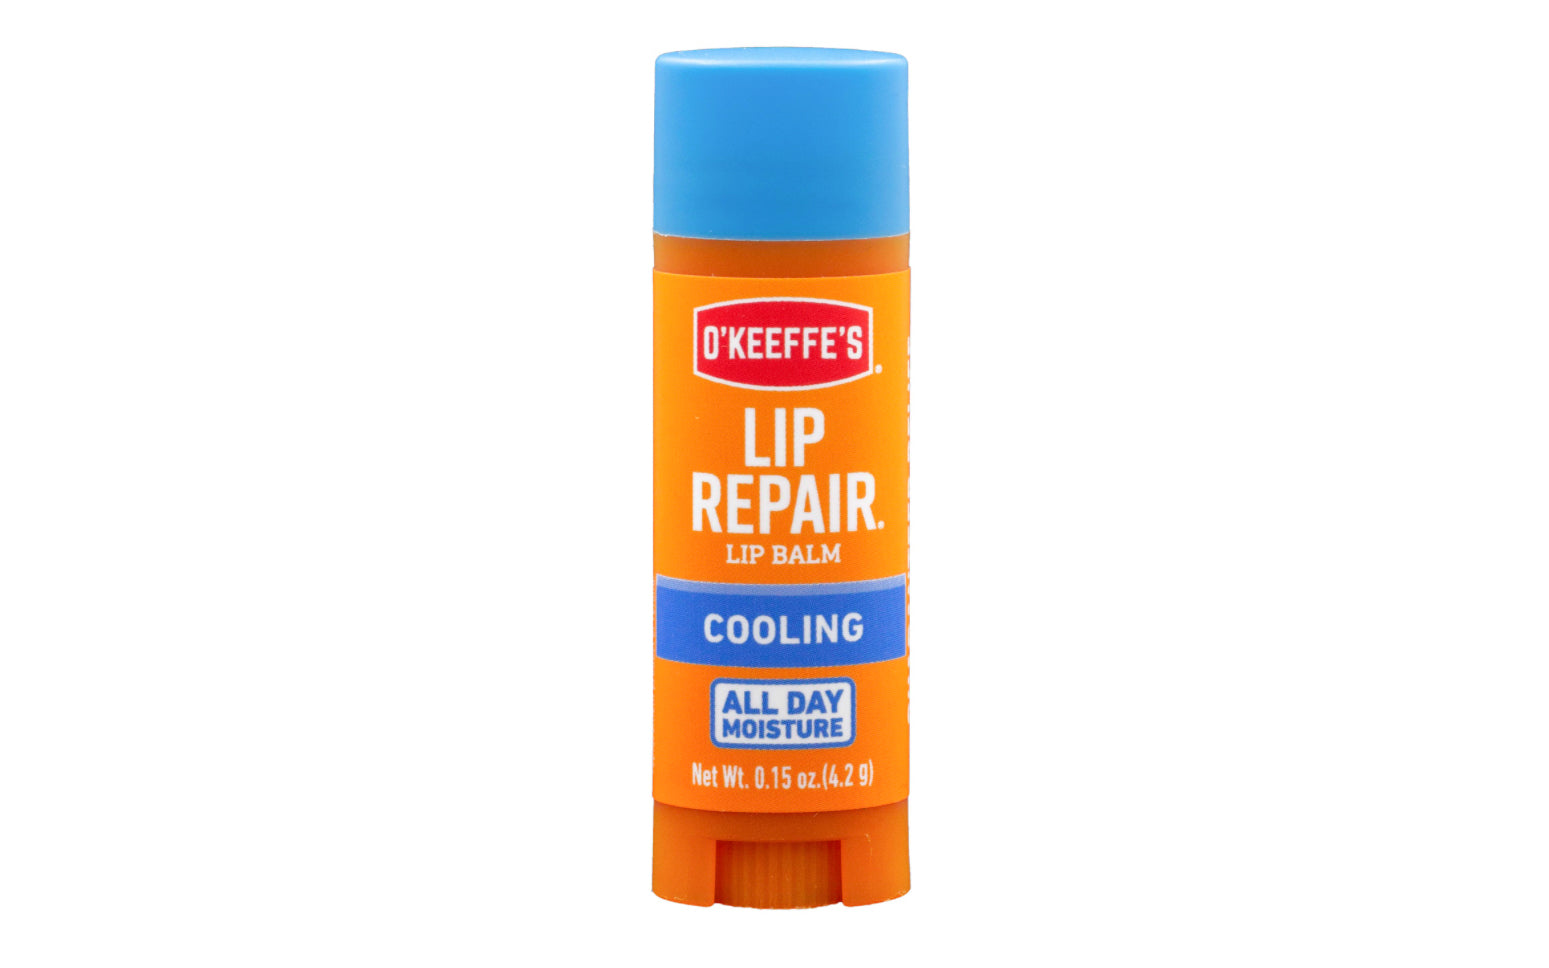 O'Keeffe's Lip Repair heals, relieves, & repairs extremely dry, cracked lips. Absorbs quickly to provide instant relief. Cooling relief. Made in USA. 722510071010